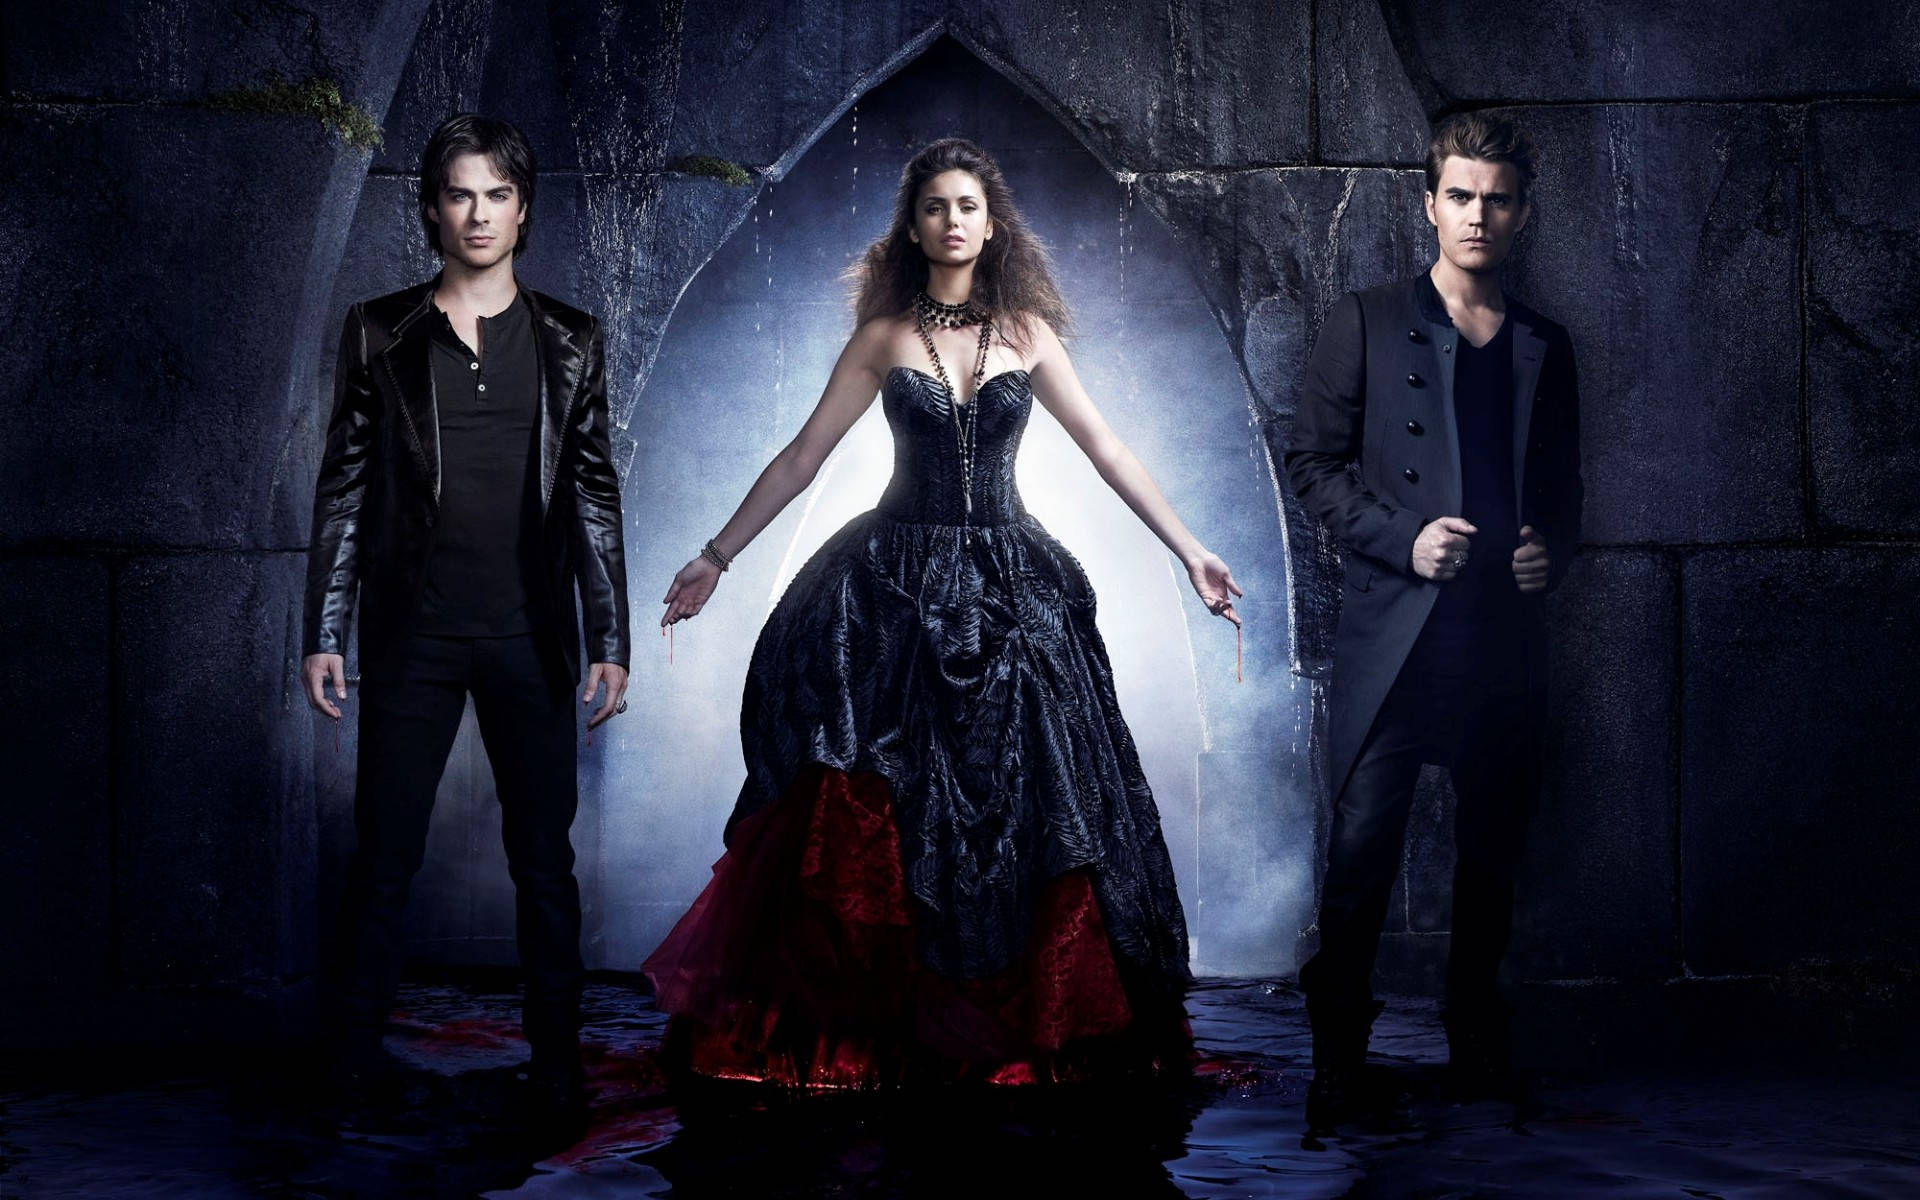 The Vampire Diaries Cast In Gothic Formal Outfits